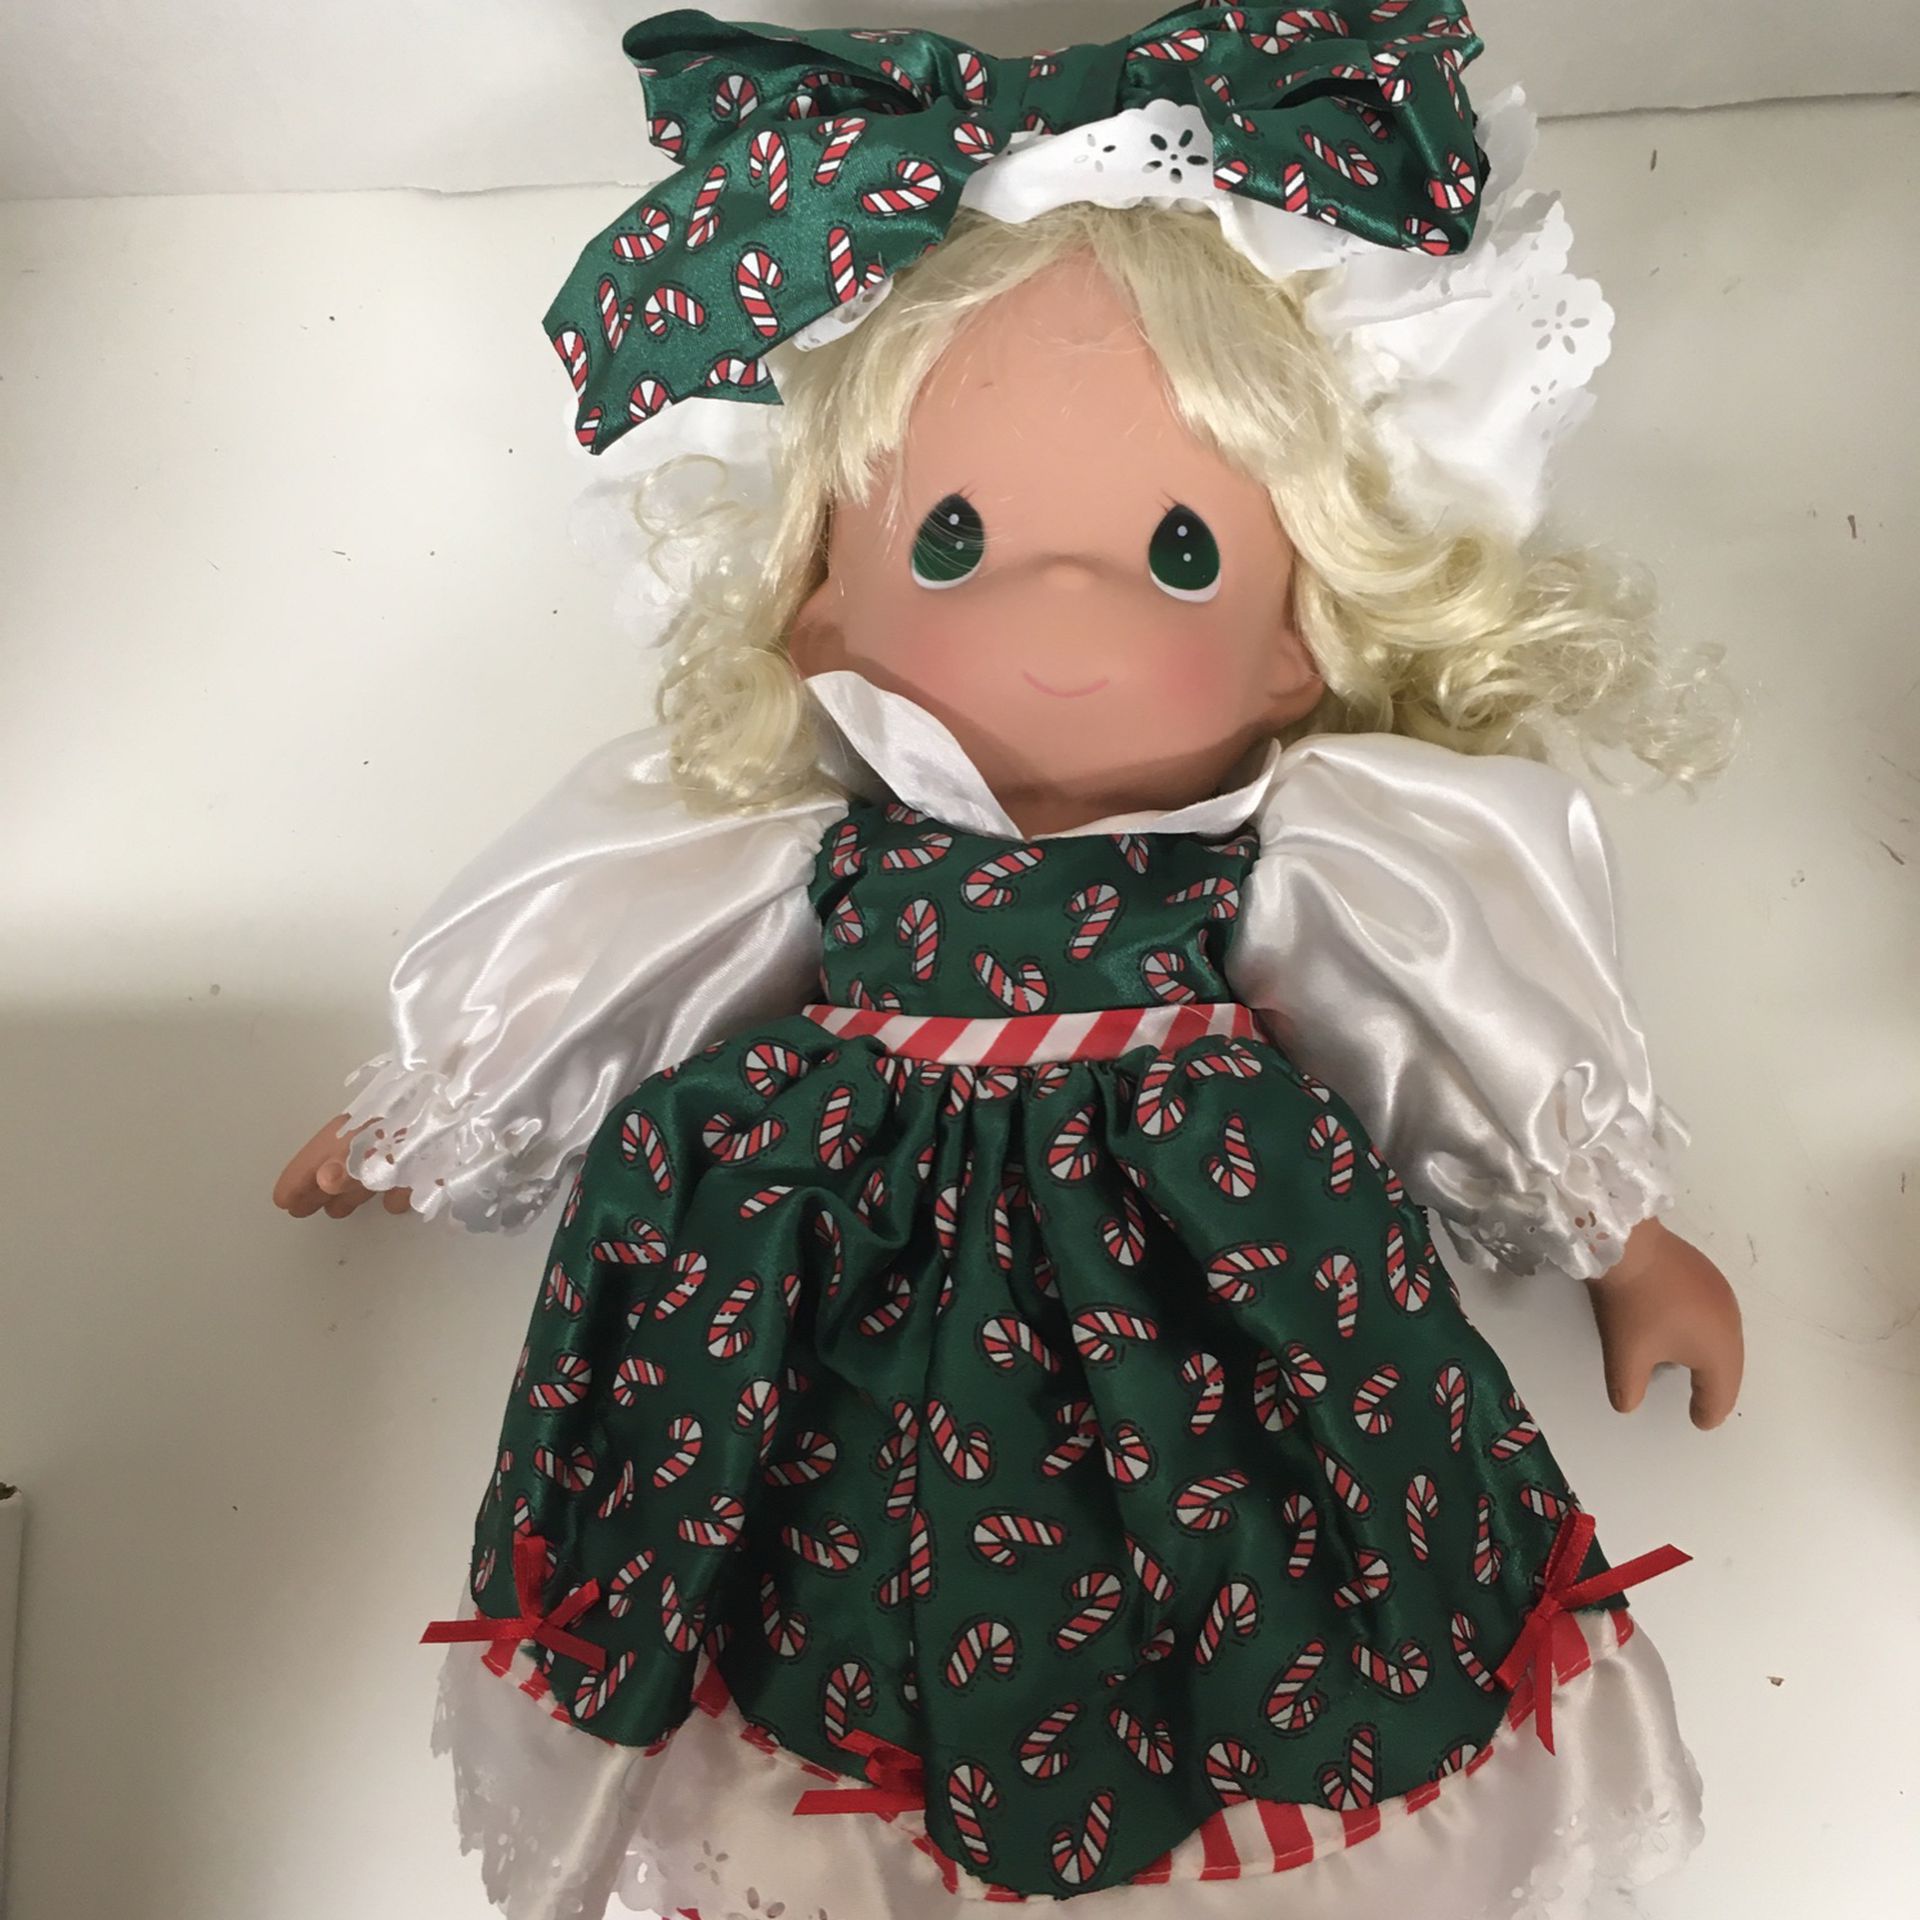 Precious Moments Christmas Doll, 15 Inches 